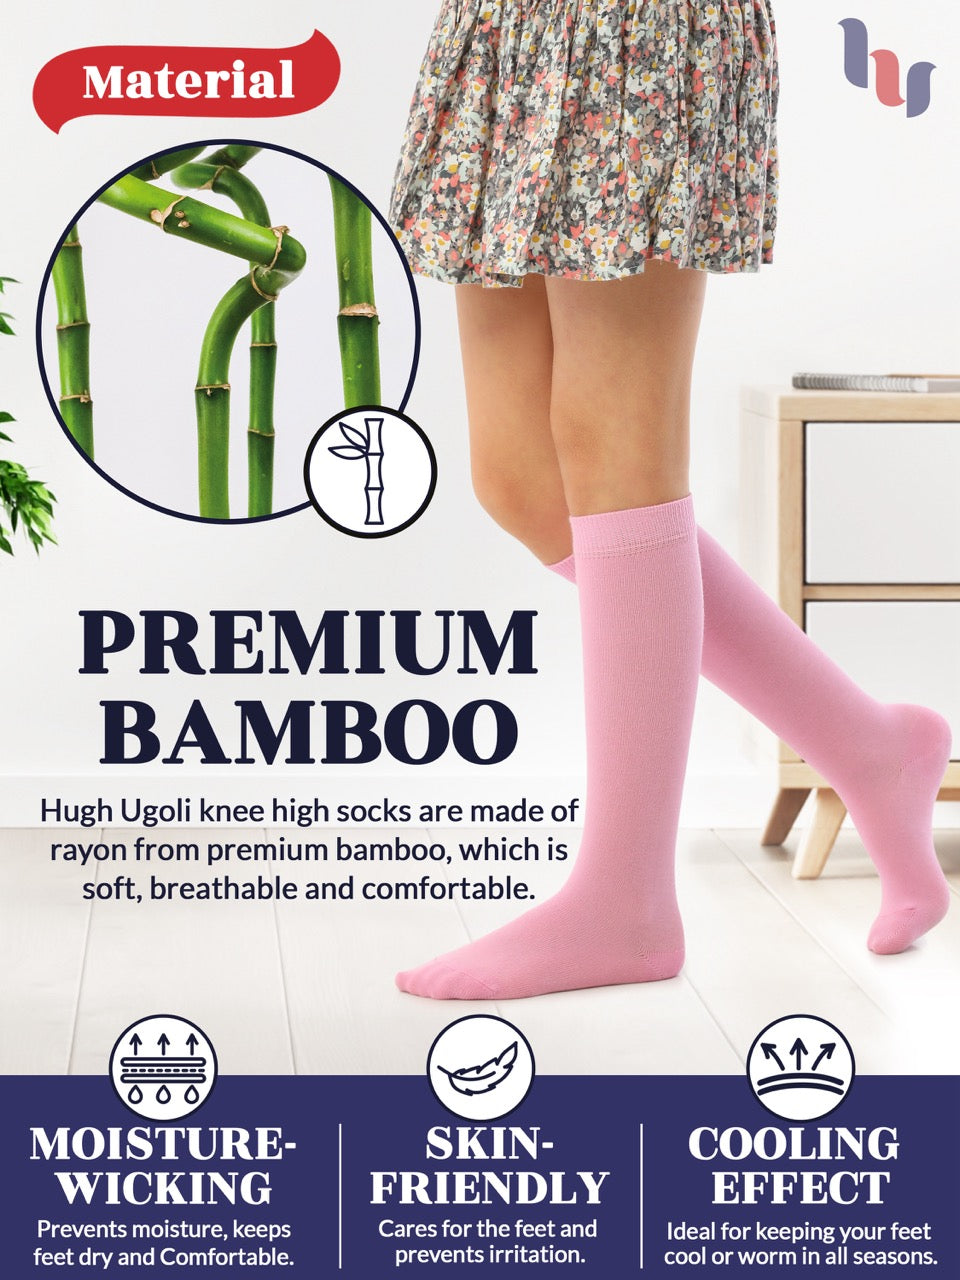 Experience the ultimate comfort and style with Hugh Ugoli Kids Bamboo School Socks. These pink socks perfect for school or everyday wear, our high-quality knee-high socks meet uniform standards while reducing blisters and staying in place. Available in four sizes for children aged 3-14 years